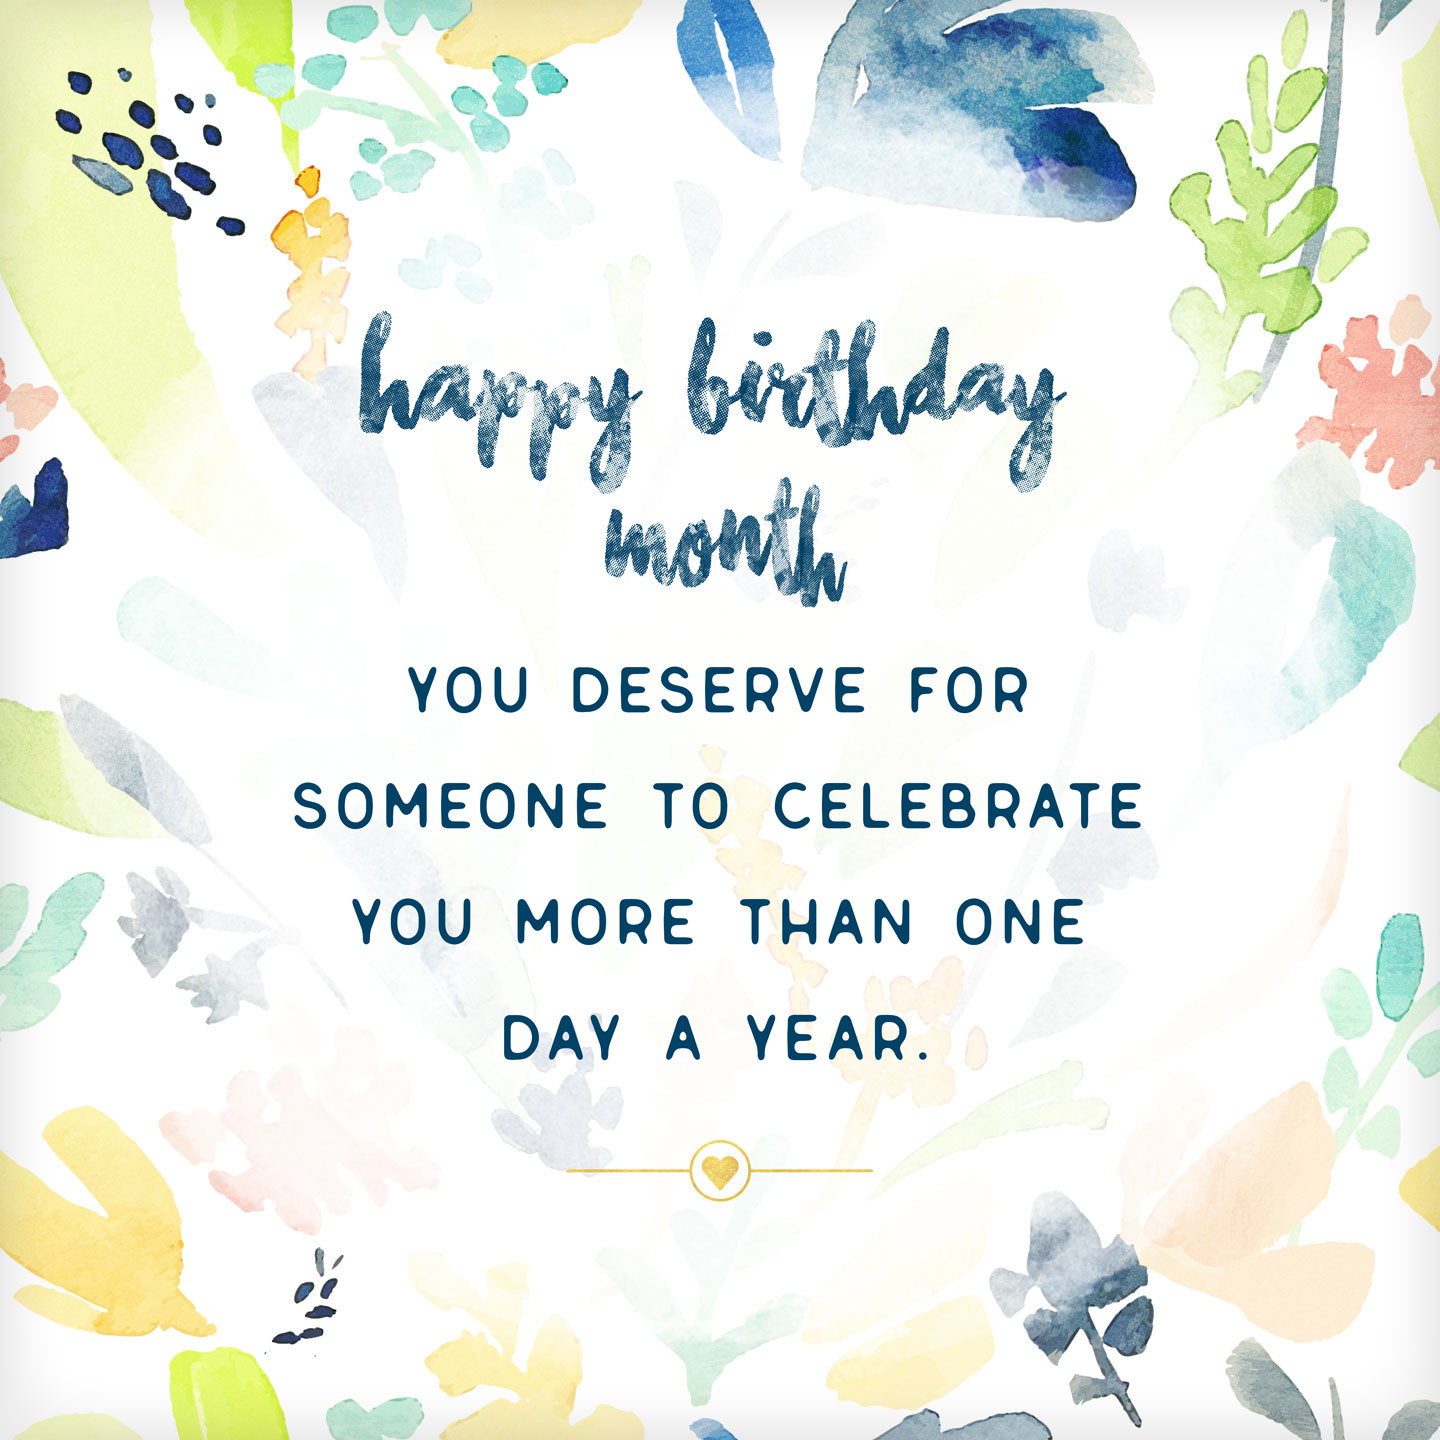 Birthday Wishes Card
 What to Write in a Birthday Card 48 Birthday Messages and